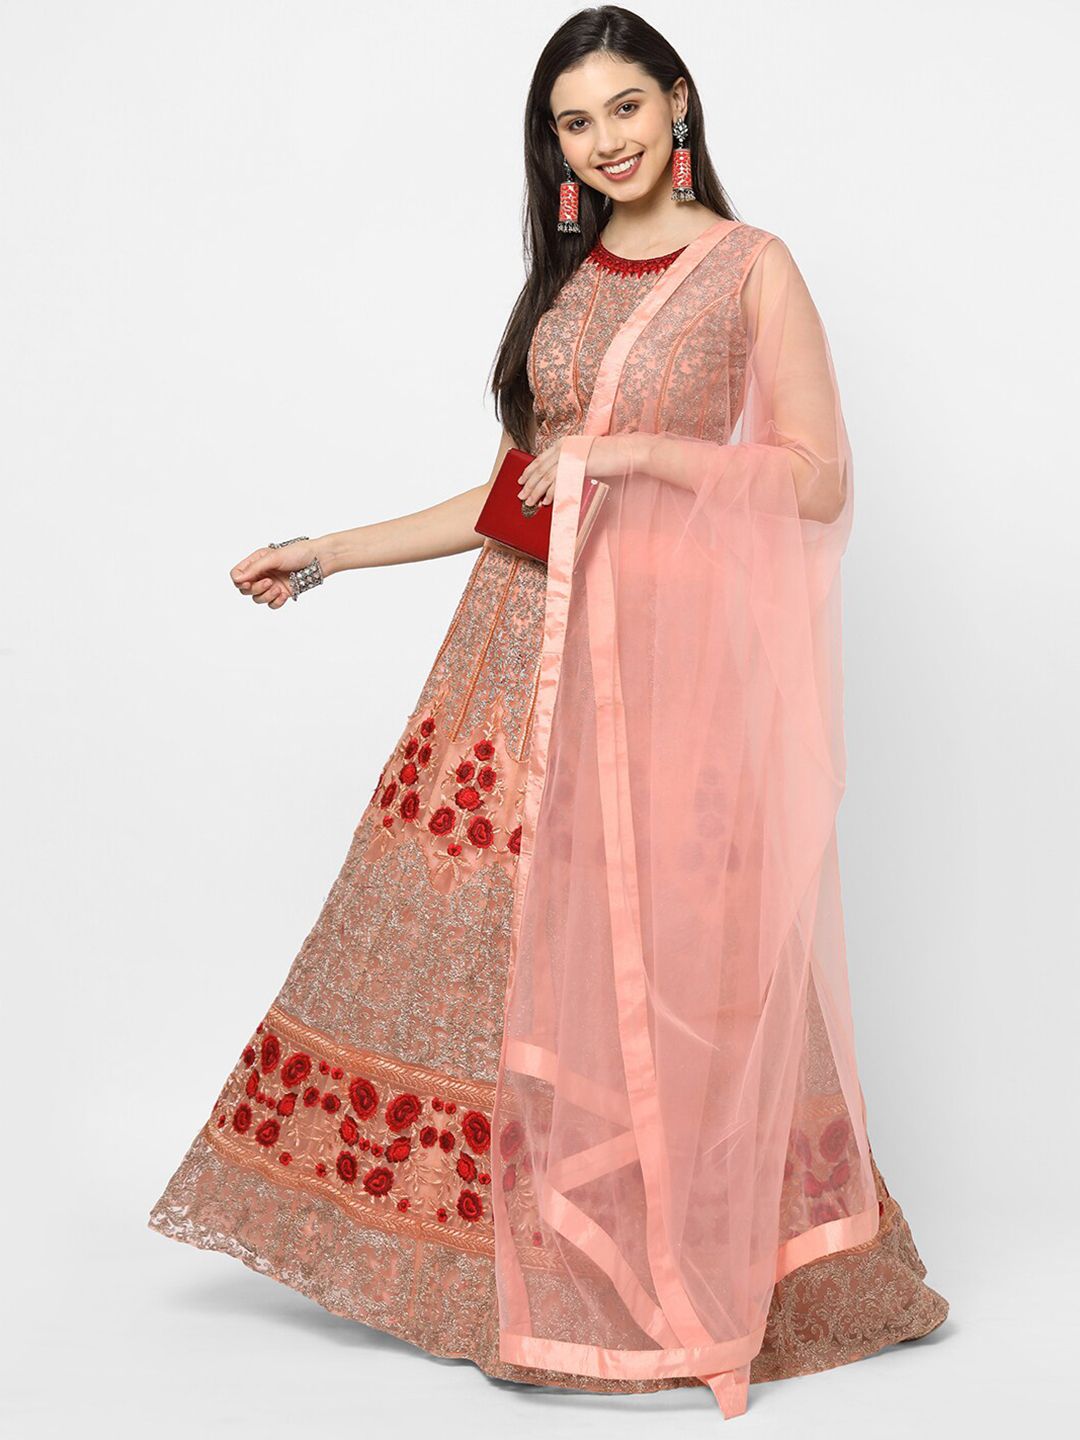 RedRound Pink & Red Embroidered Thread Work Semi-Stitched Lehenga & Unstitched Blouse With Dupatta Price in India